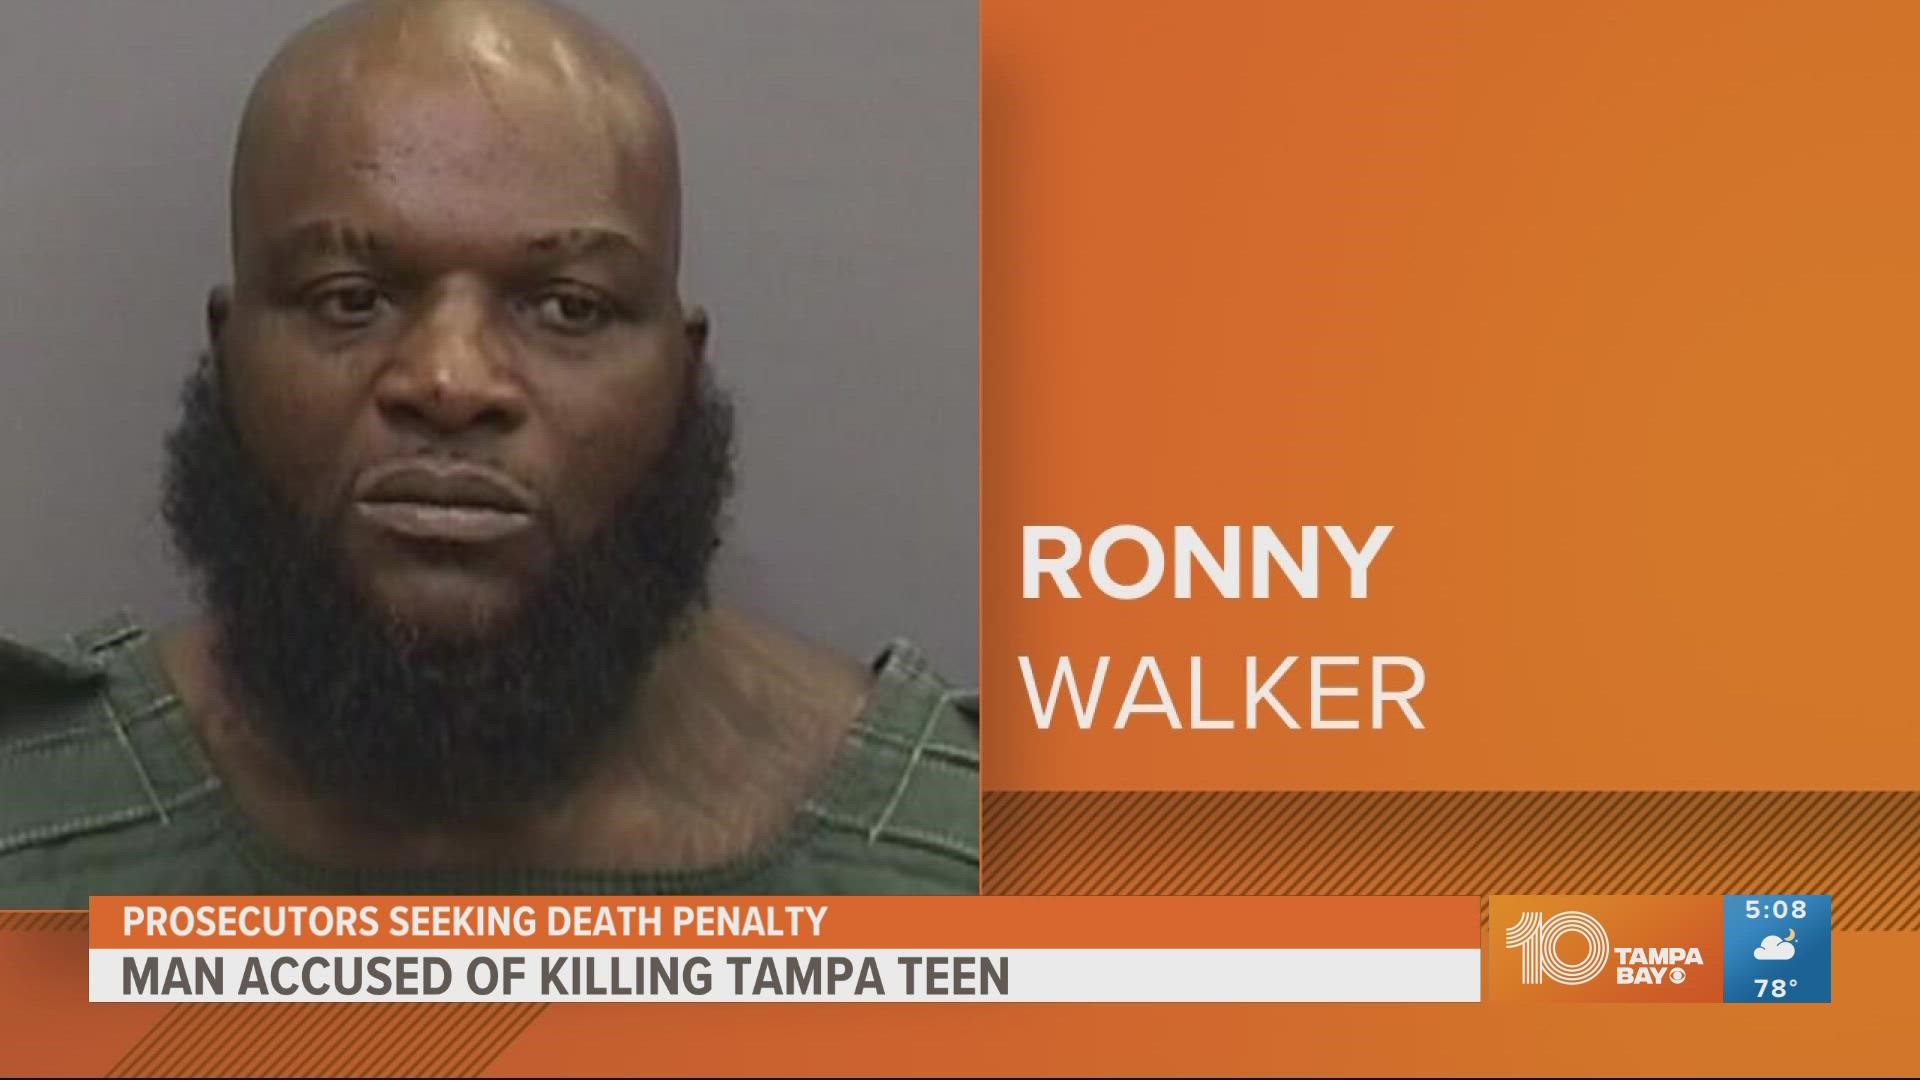 Ronny Walker is charged with first-degree murder for the shooting death of the missing 14-year-old.